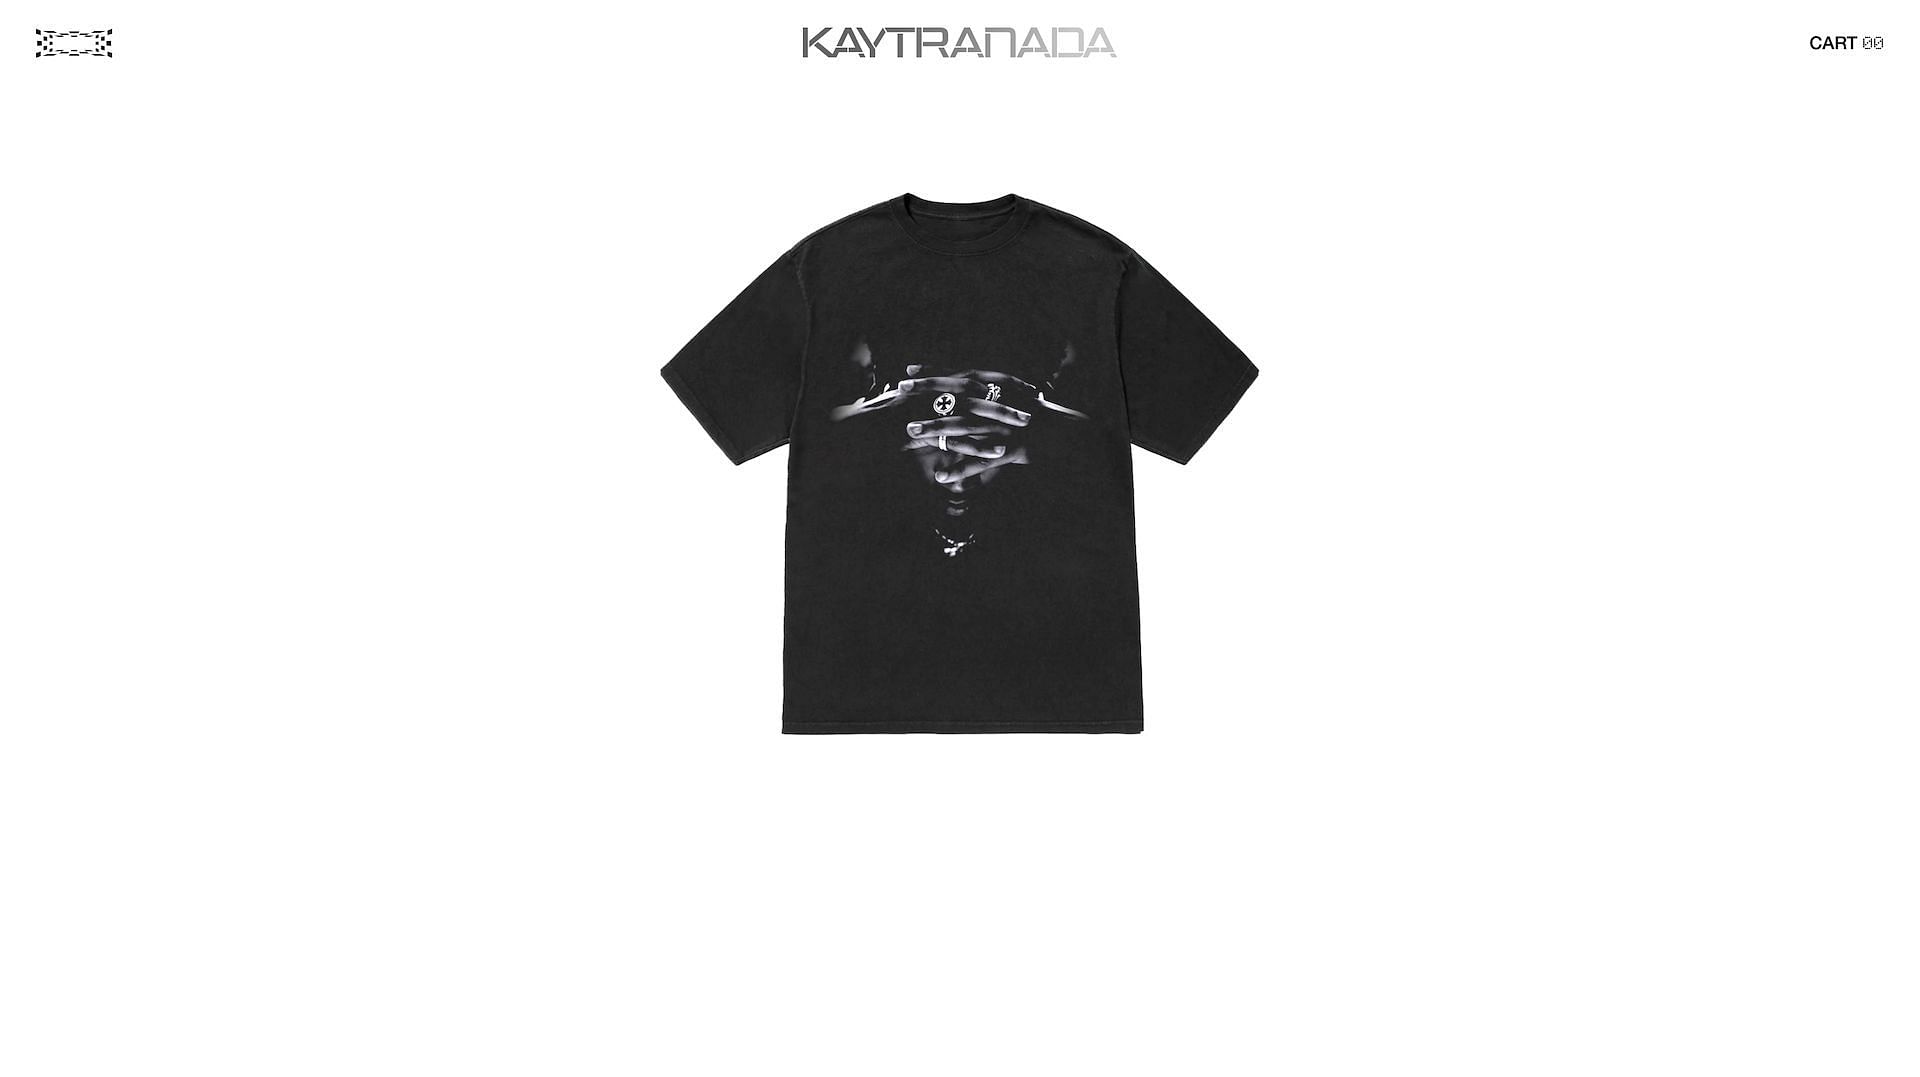 A screenshot of the &quot;Black Tee - Merch&quot; that Kaytranada has listed on his website for &#039;Timeless&#039; (Image via www.kaytranadamerch.com)